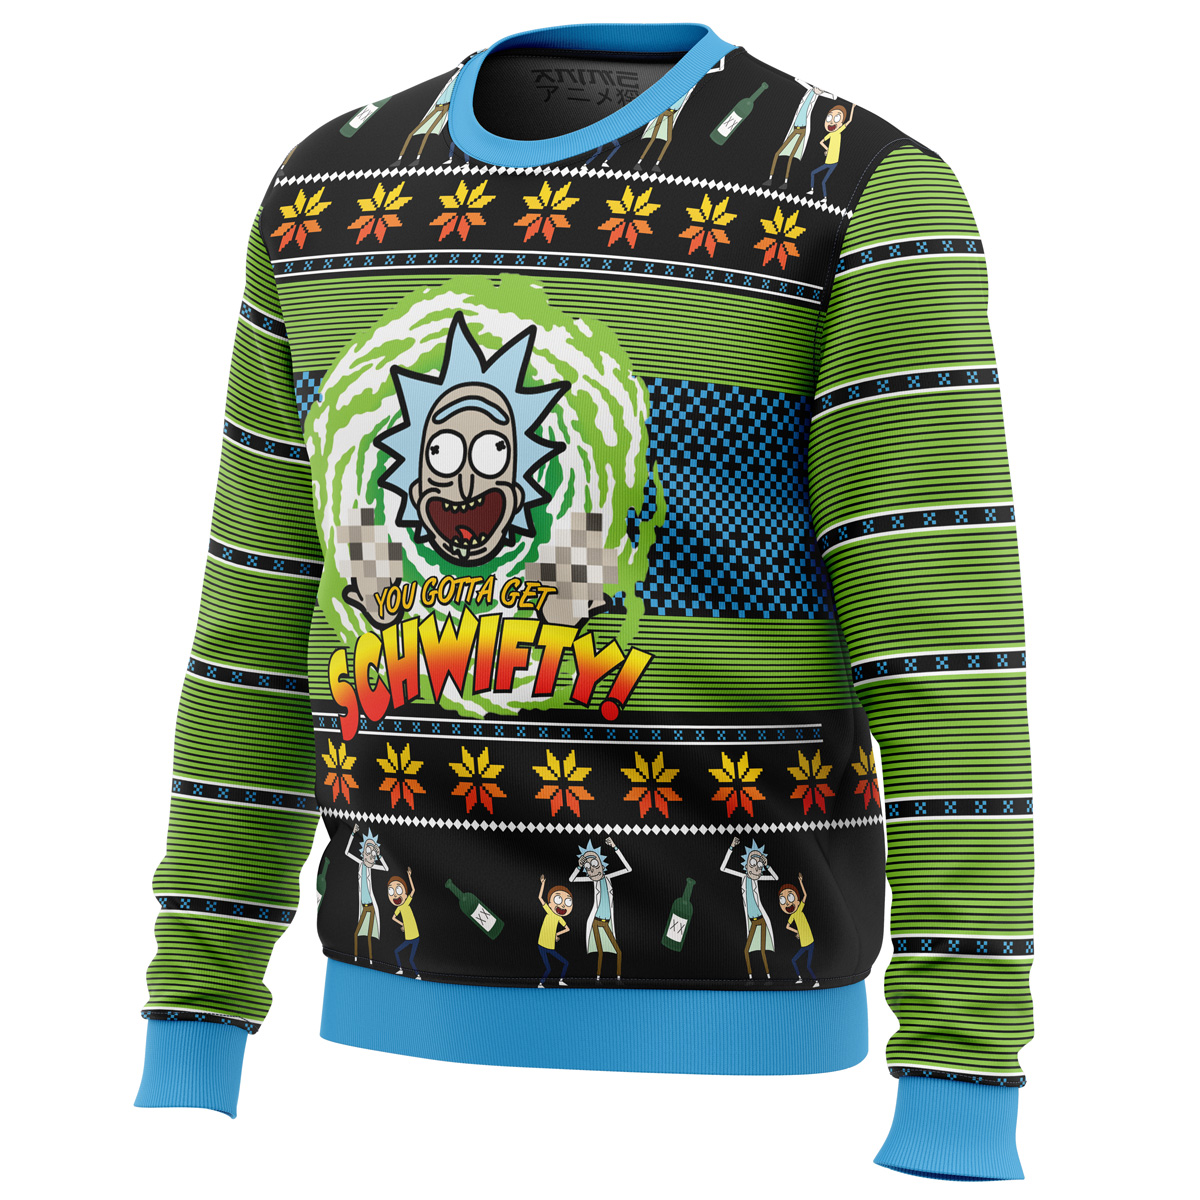 Let's Get Schwifty! Rick and Morty Ugly Christmas Sweater